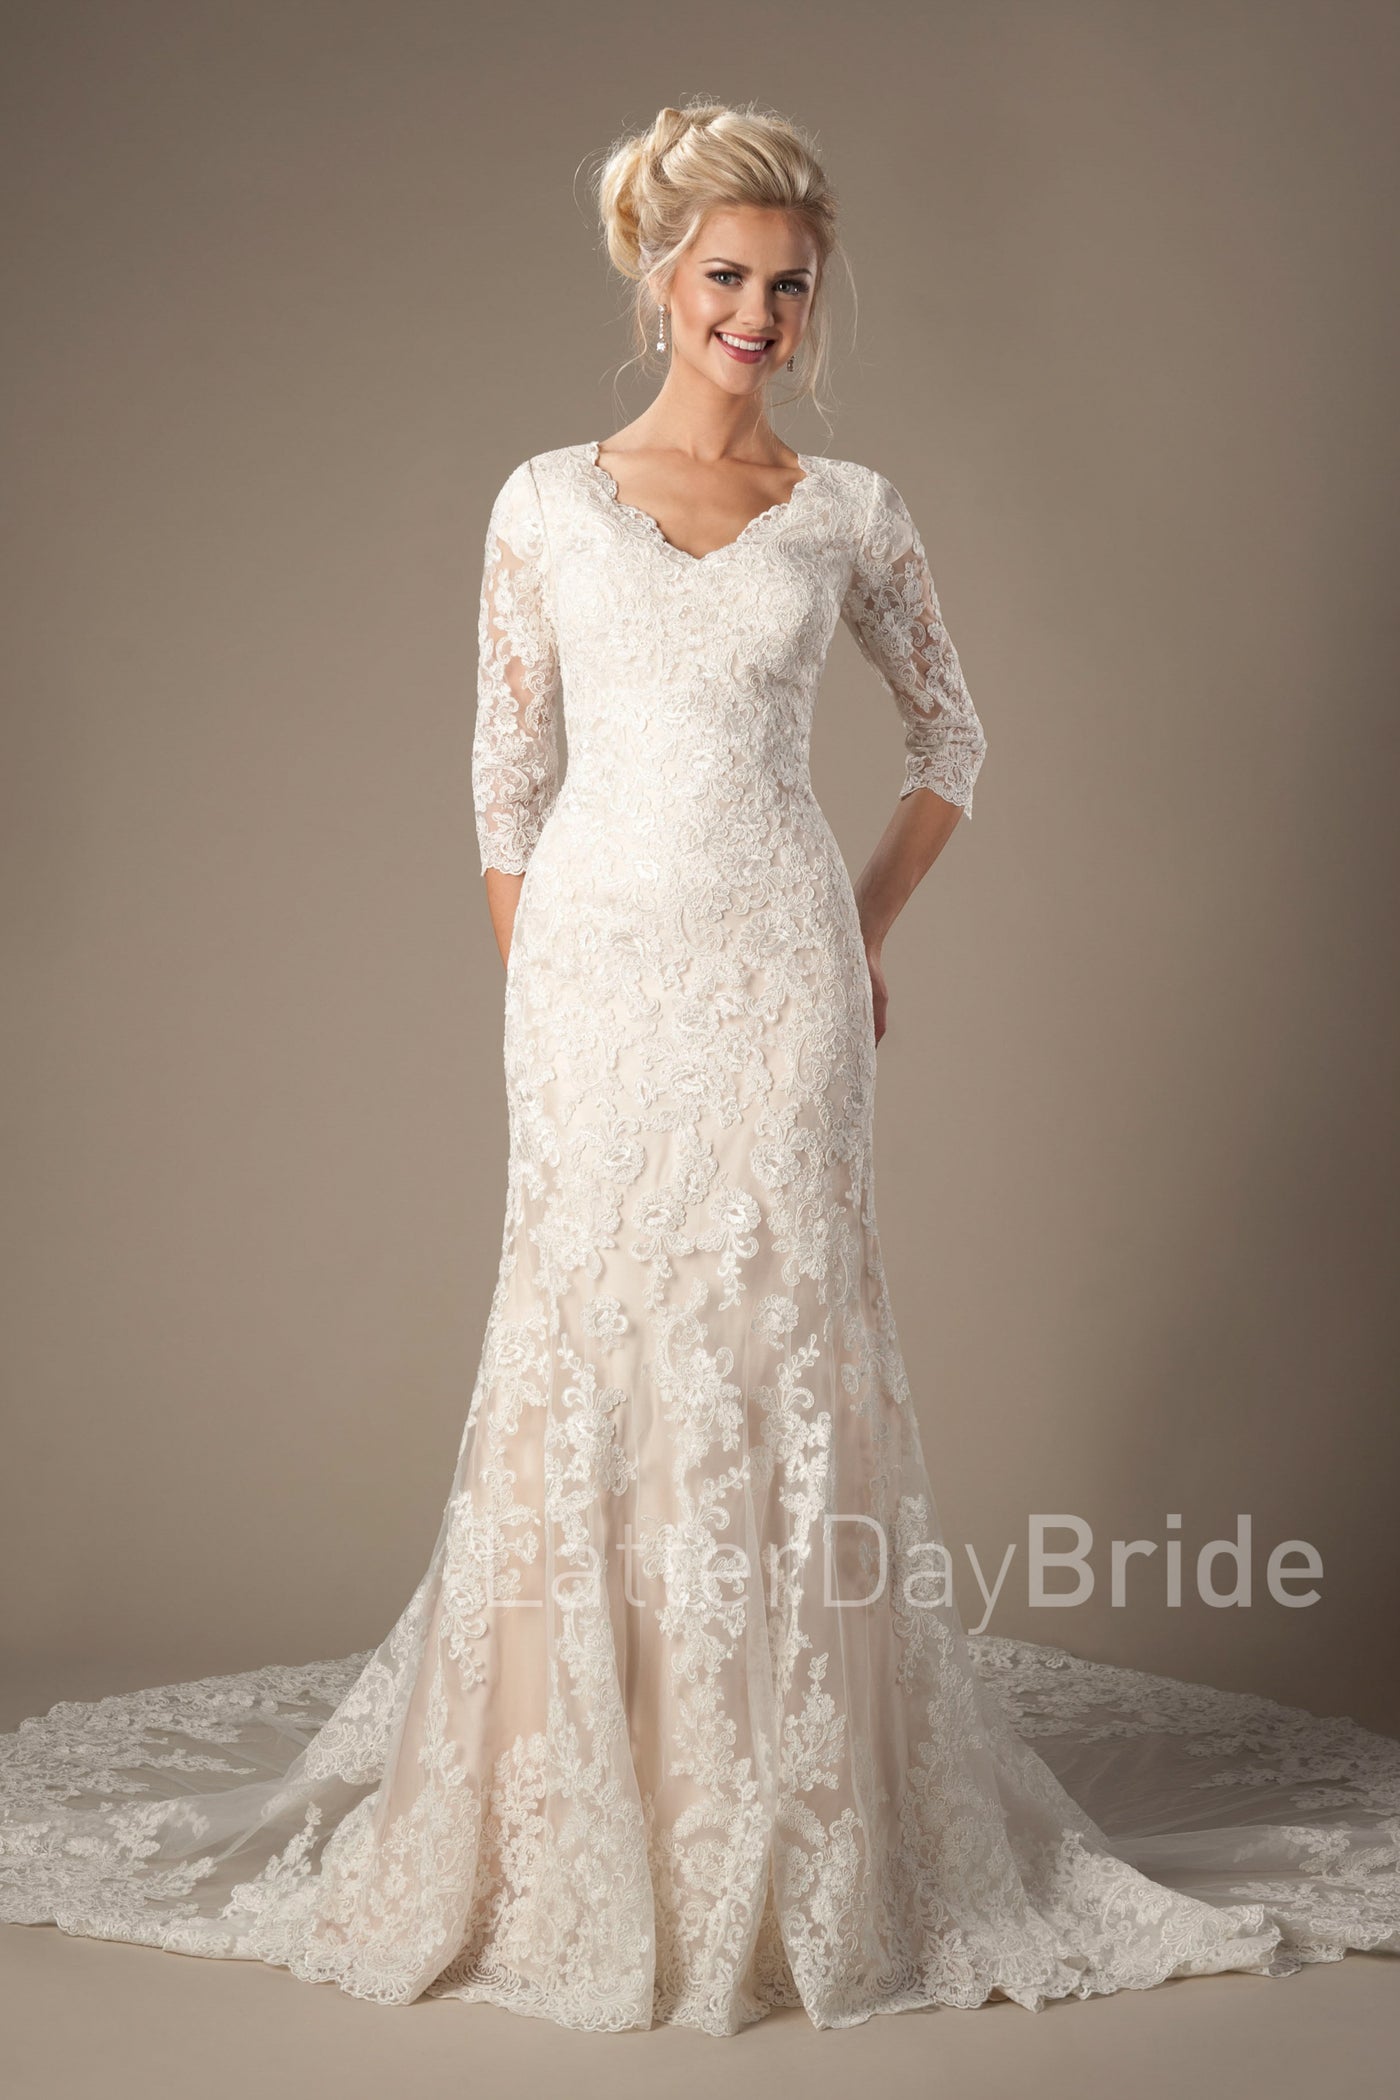 Modest wedding gown with illusion lace sleeves, style Romero, is part of the Wedding Collection of LatterDayBride, a Utah Wedding Shop. 